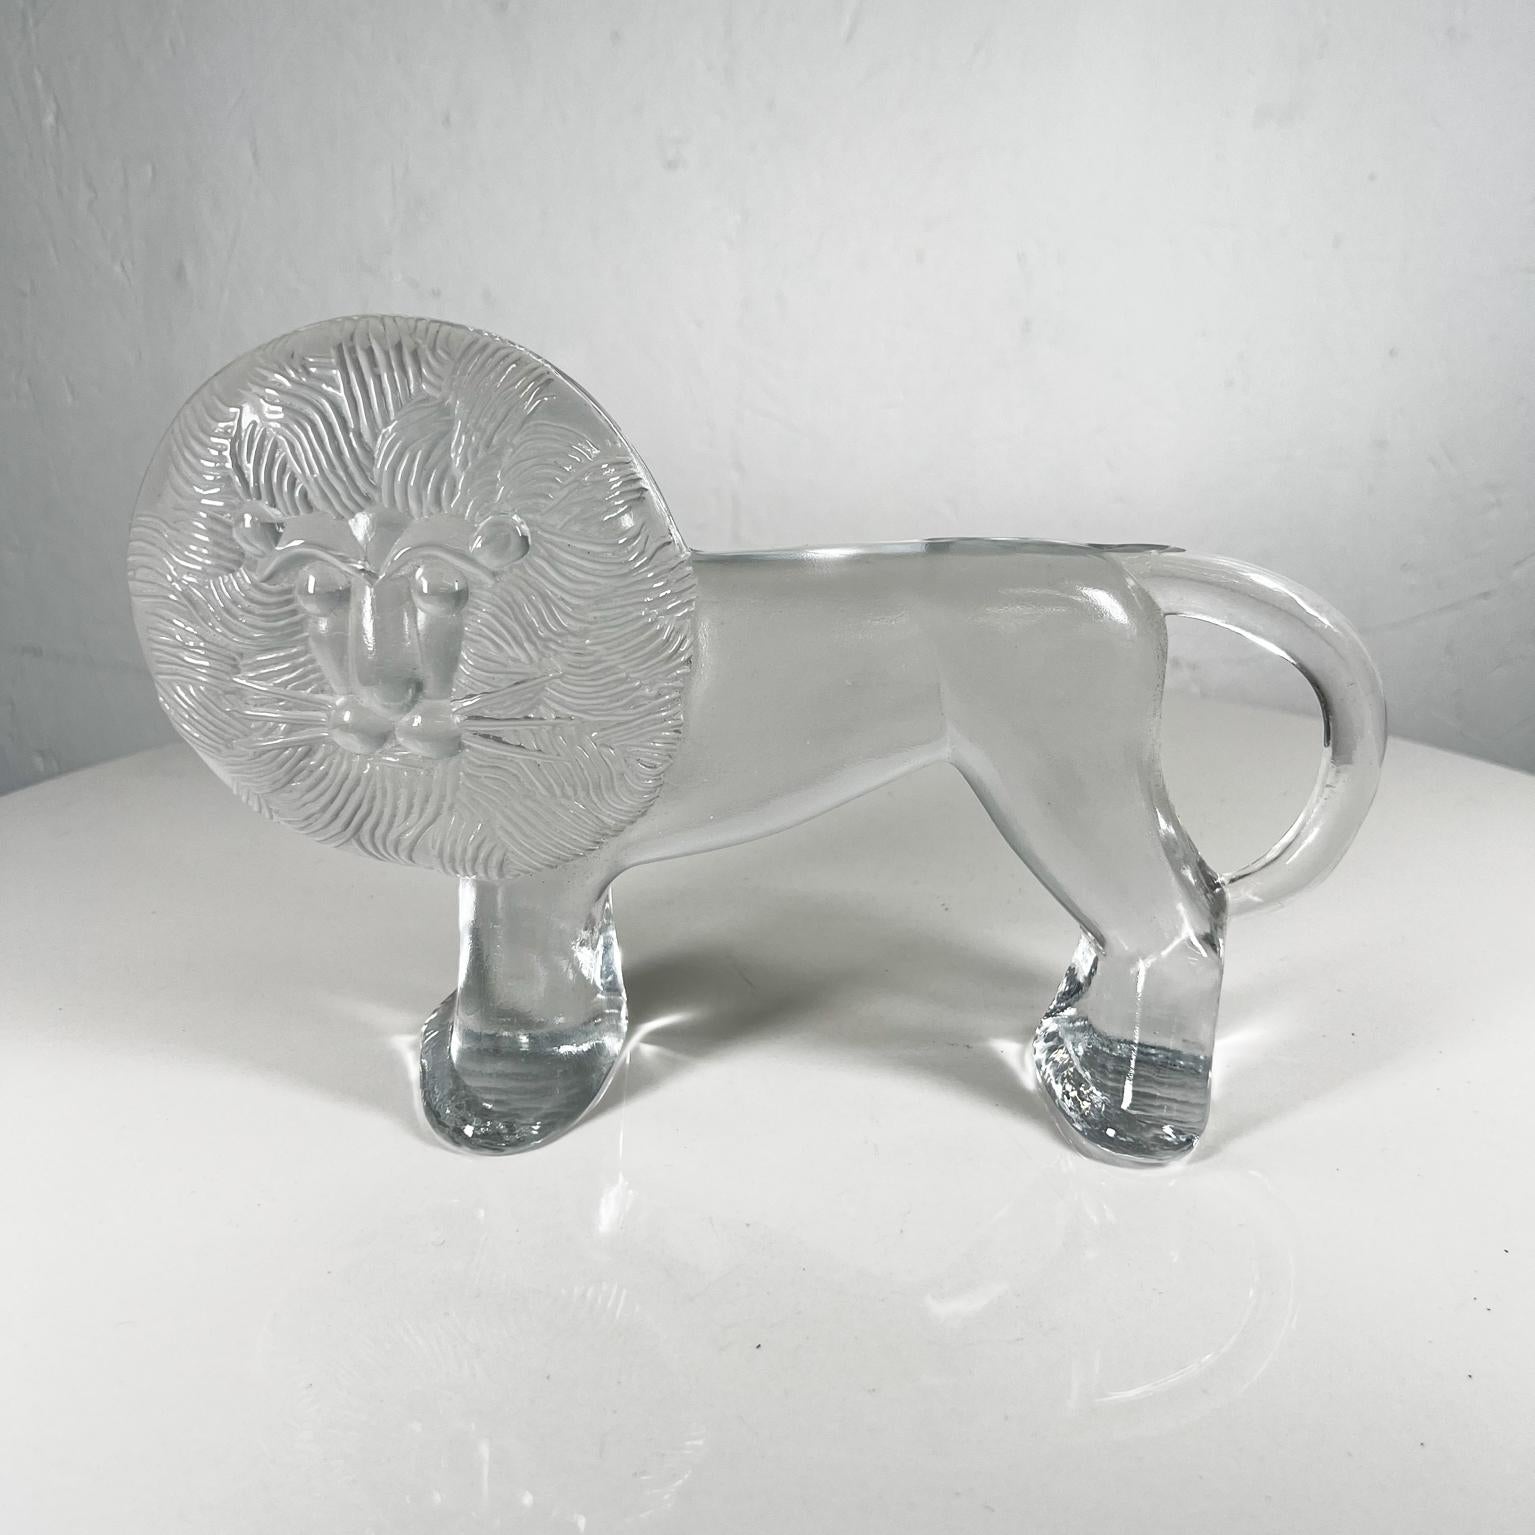 AMBIANIC presents
For Kosta Boda Art Glass Large Lion Bertil Vallien Kennel Zoo
Elegant Glass Table Sculpture
10.25 x 6.5 x 2 d
Original vintage preowned condition
Refer to images here please.

.